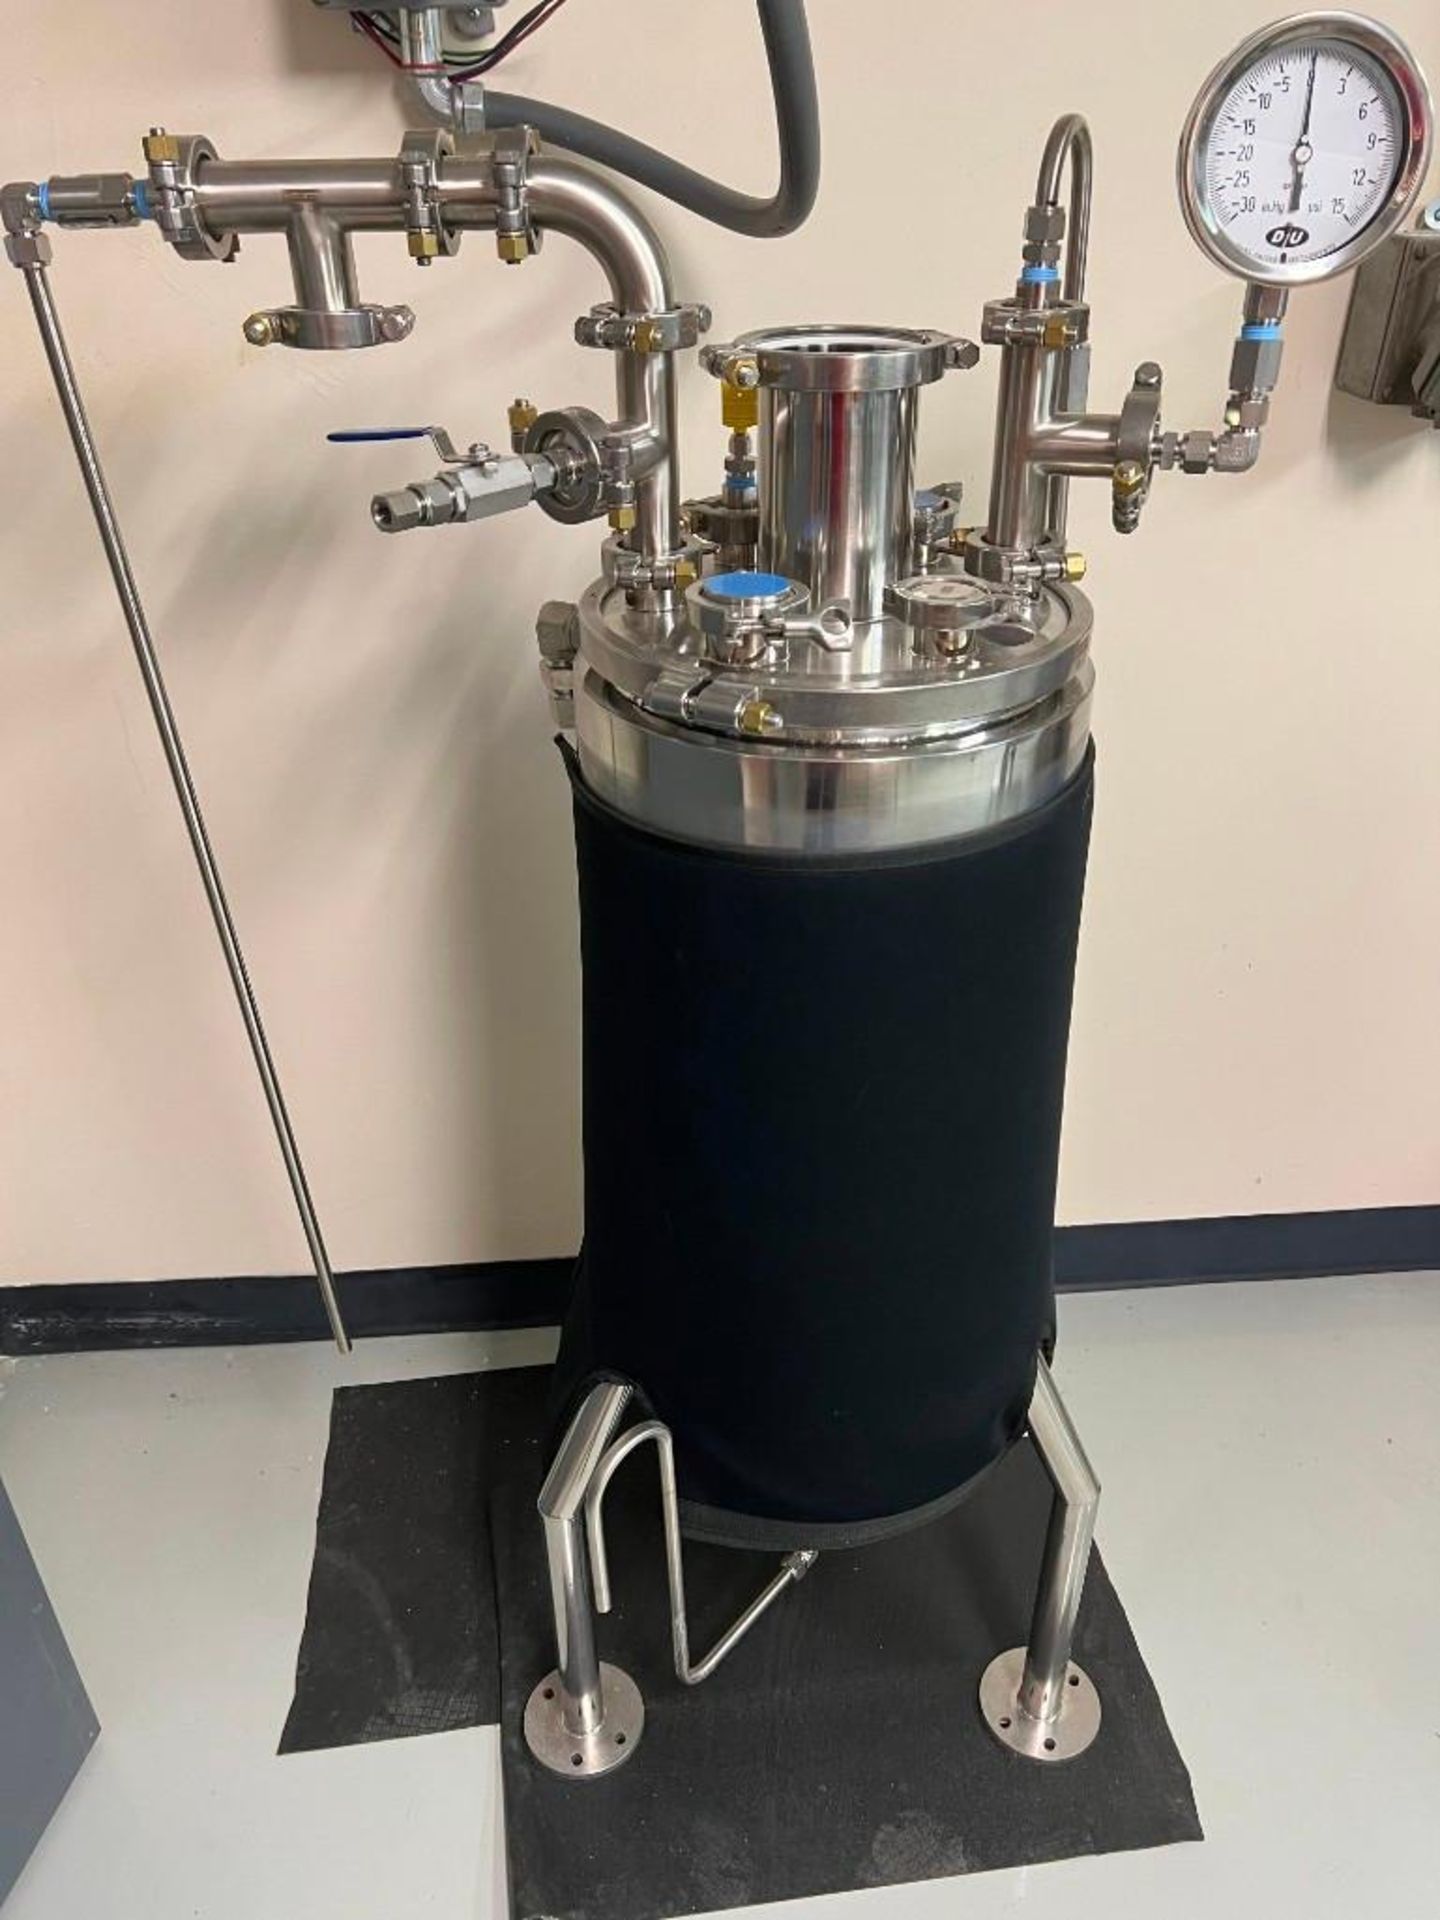 NEW TruSteel DR-10 Decarboxylation Agitated Jacketed Recovery Vessel, 304 Stainless Steel. - Image 2 of 45